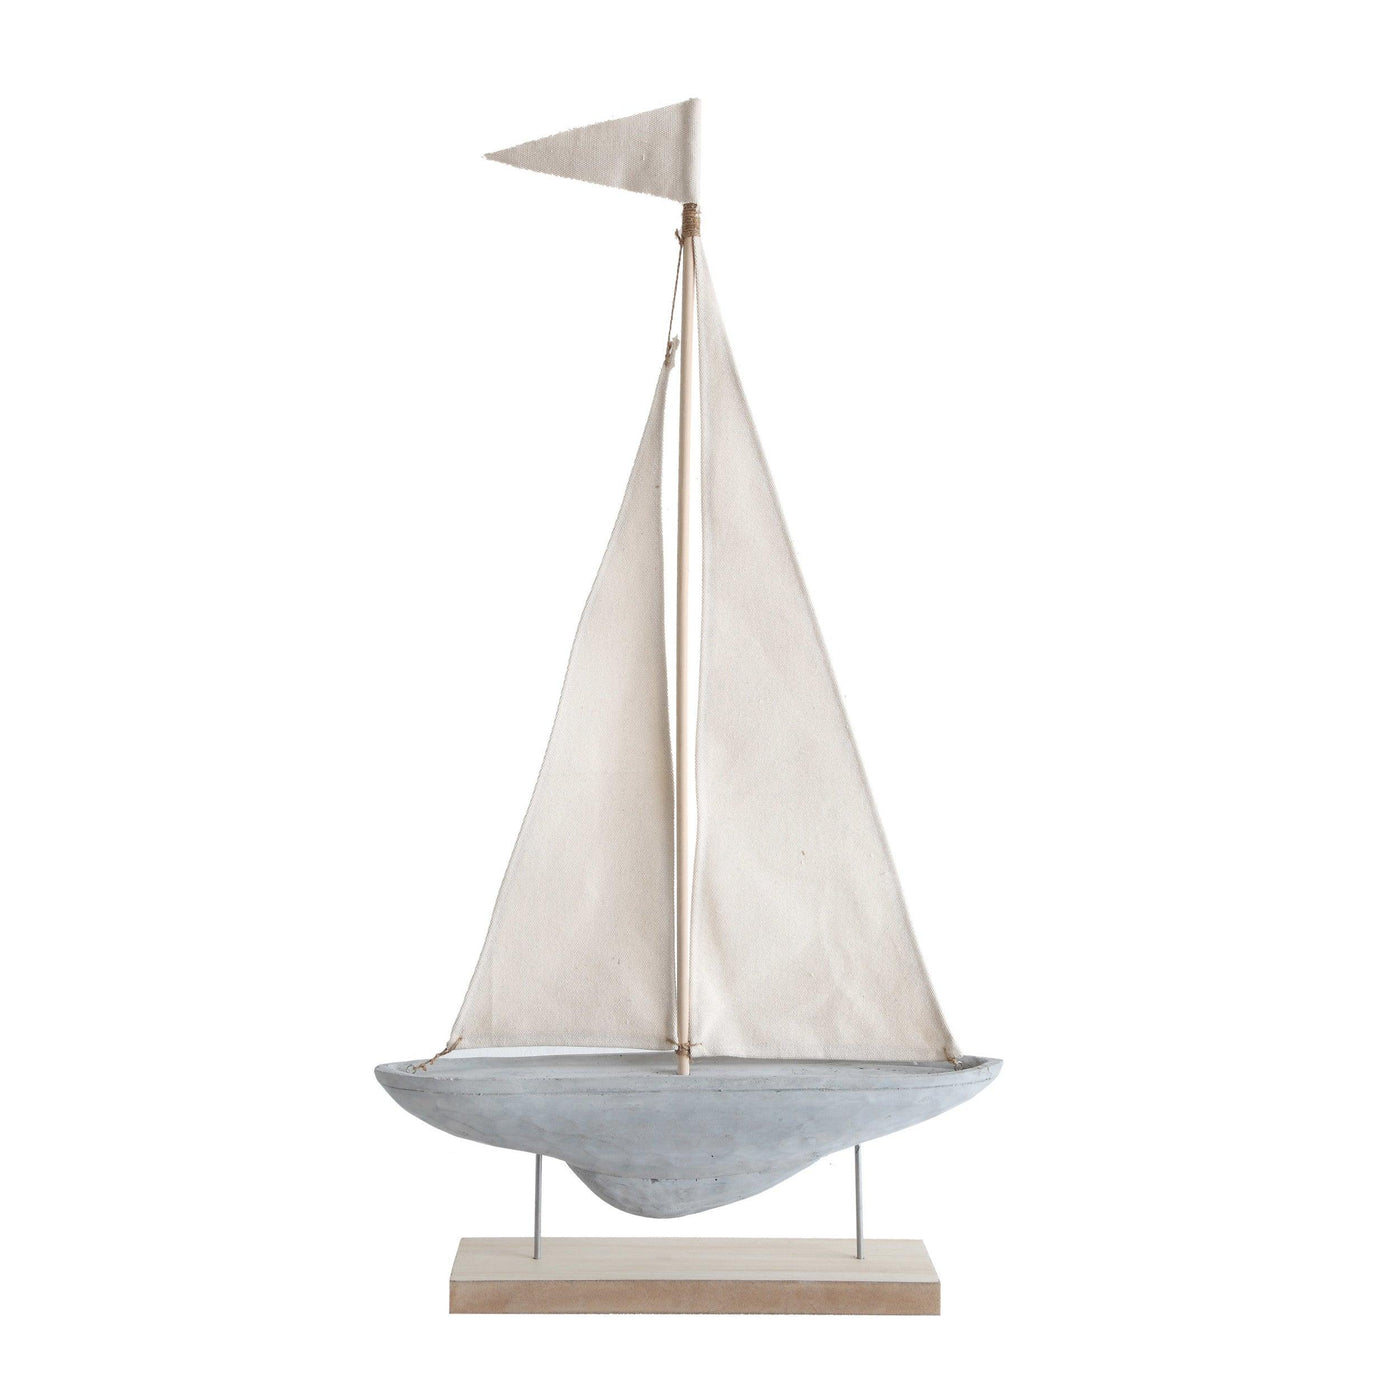 Cement and Fabric Boat on Stand - Birch and Bind